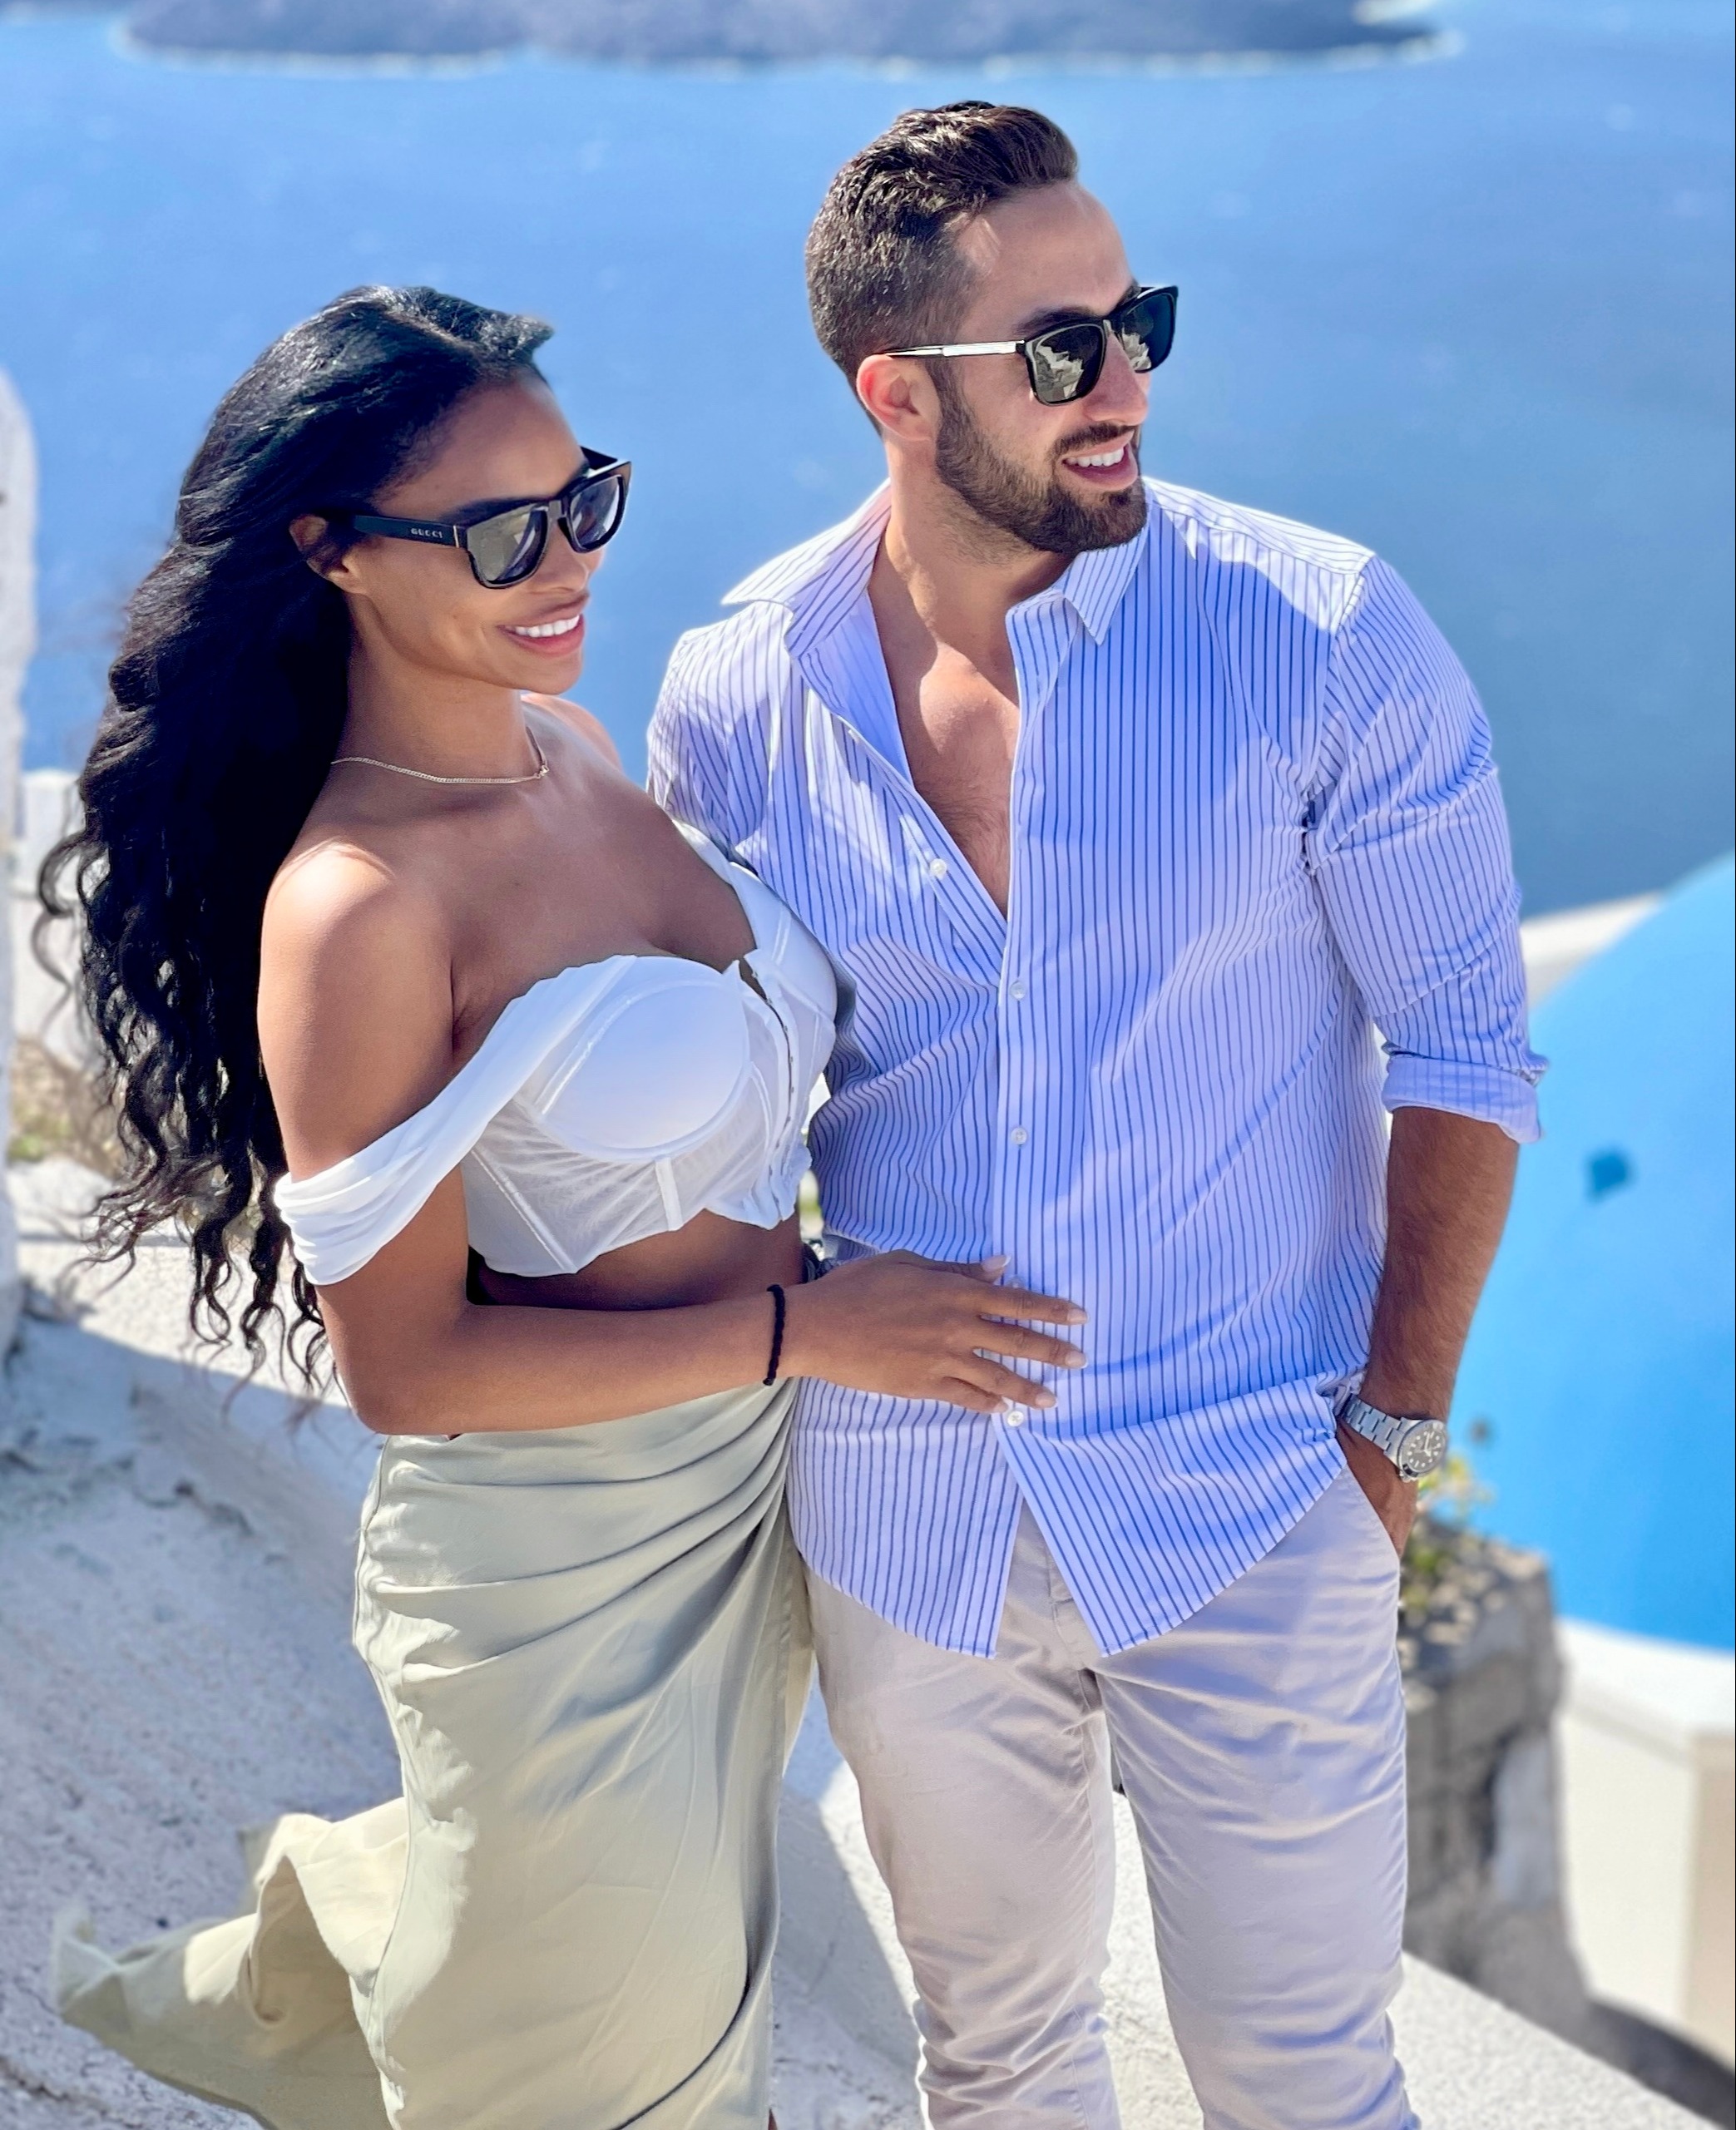 Ika and Dem have teased that they will get married in Greece but want to keep their wedding private